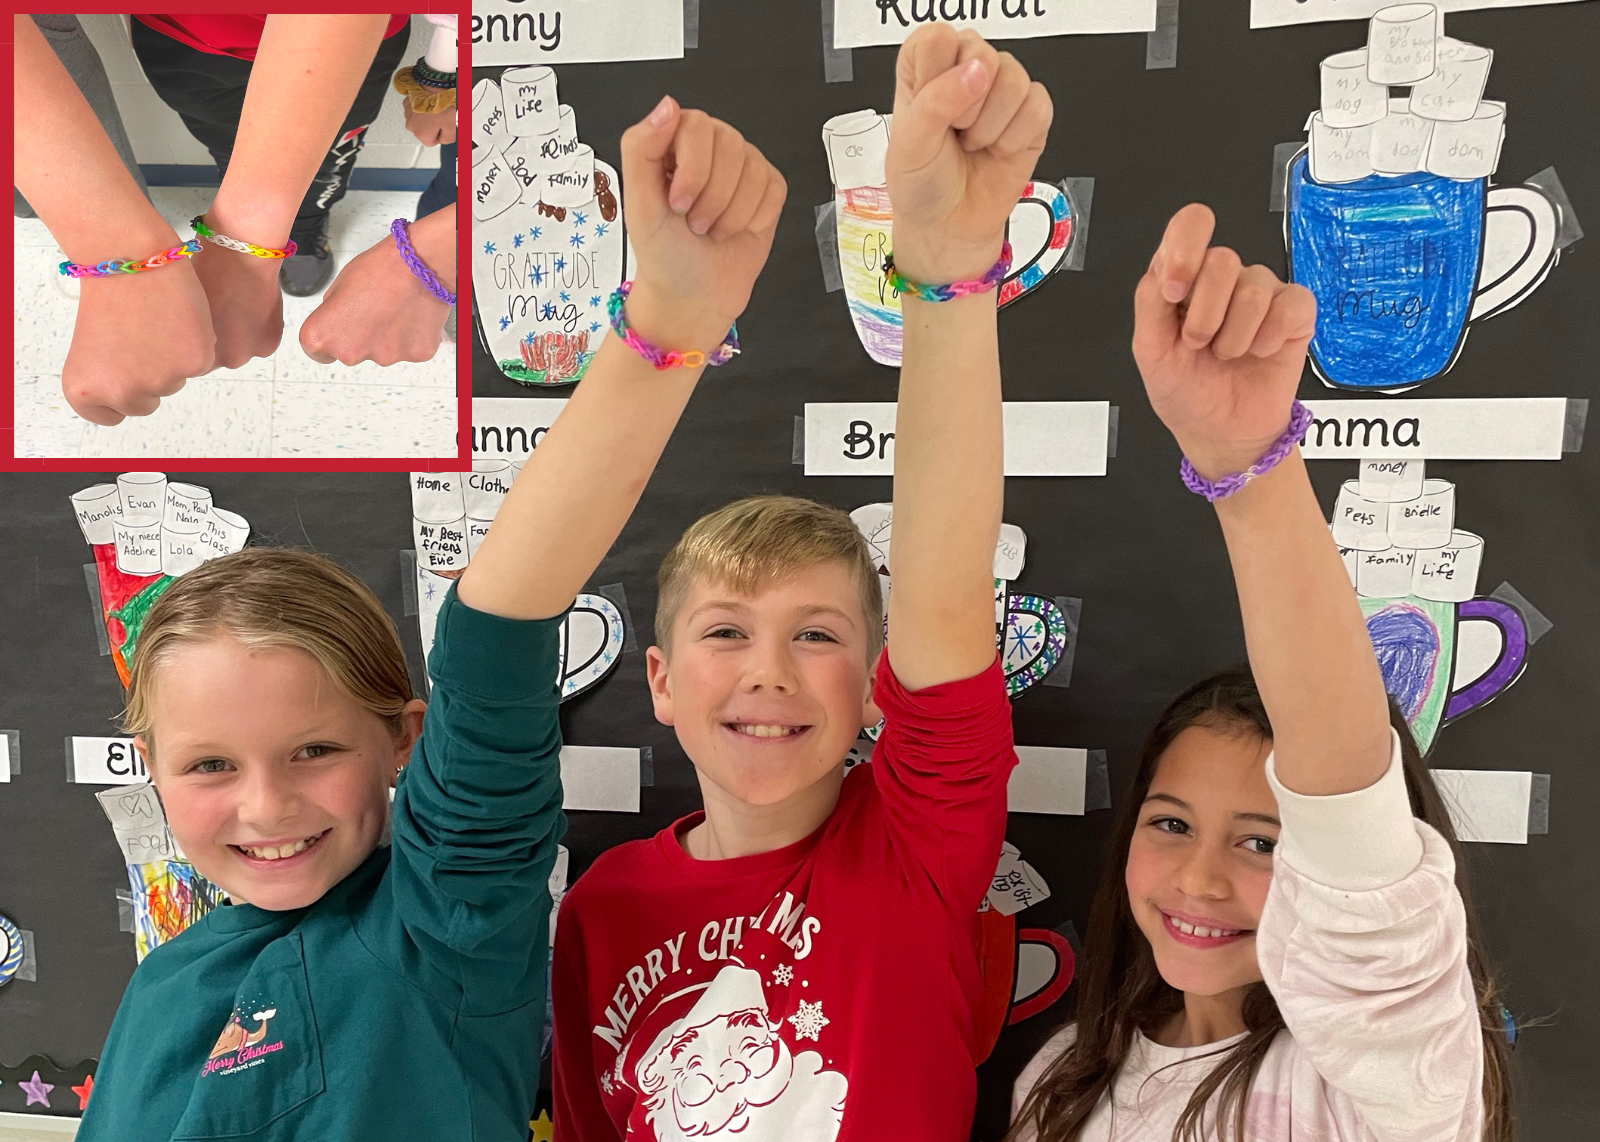 group of students smiling holding up arms to show off friendship bracelets